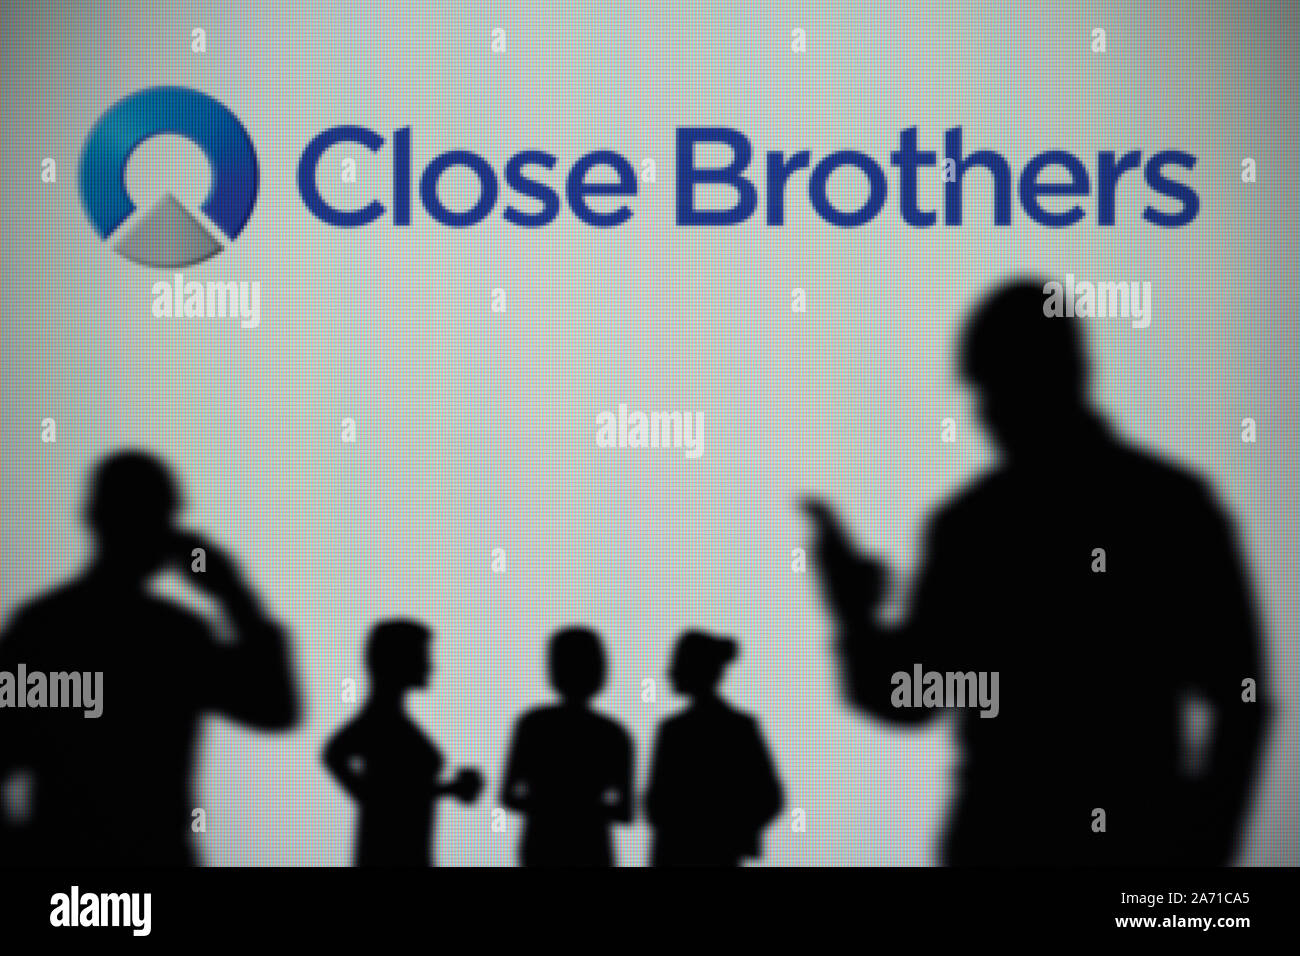 The Close Brothers Group logo is seen on an LED screen in the background while a silhouetted person uses a smartphone (Editorial use only) Stock Photo